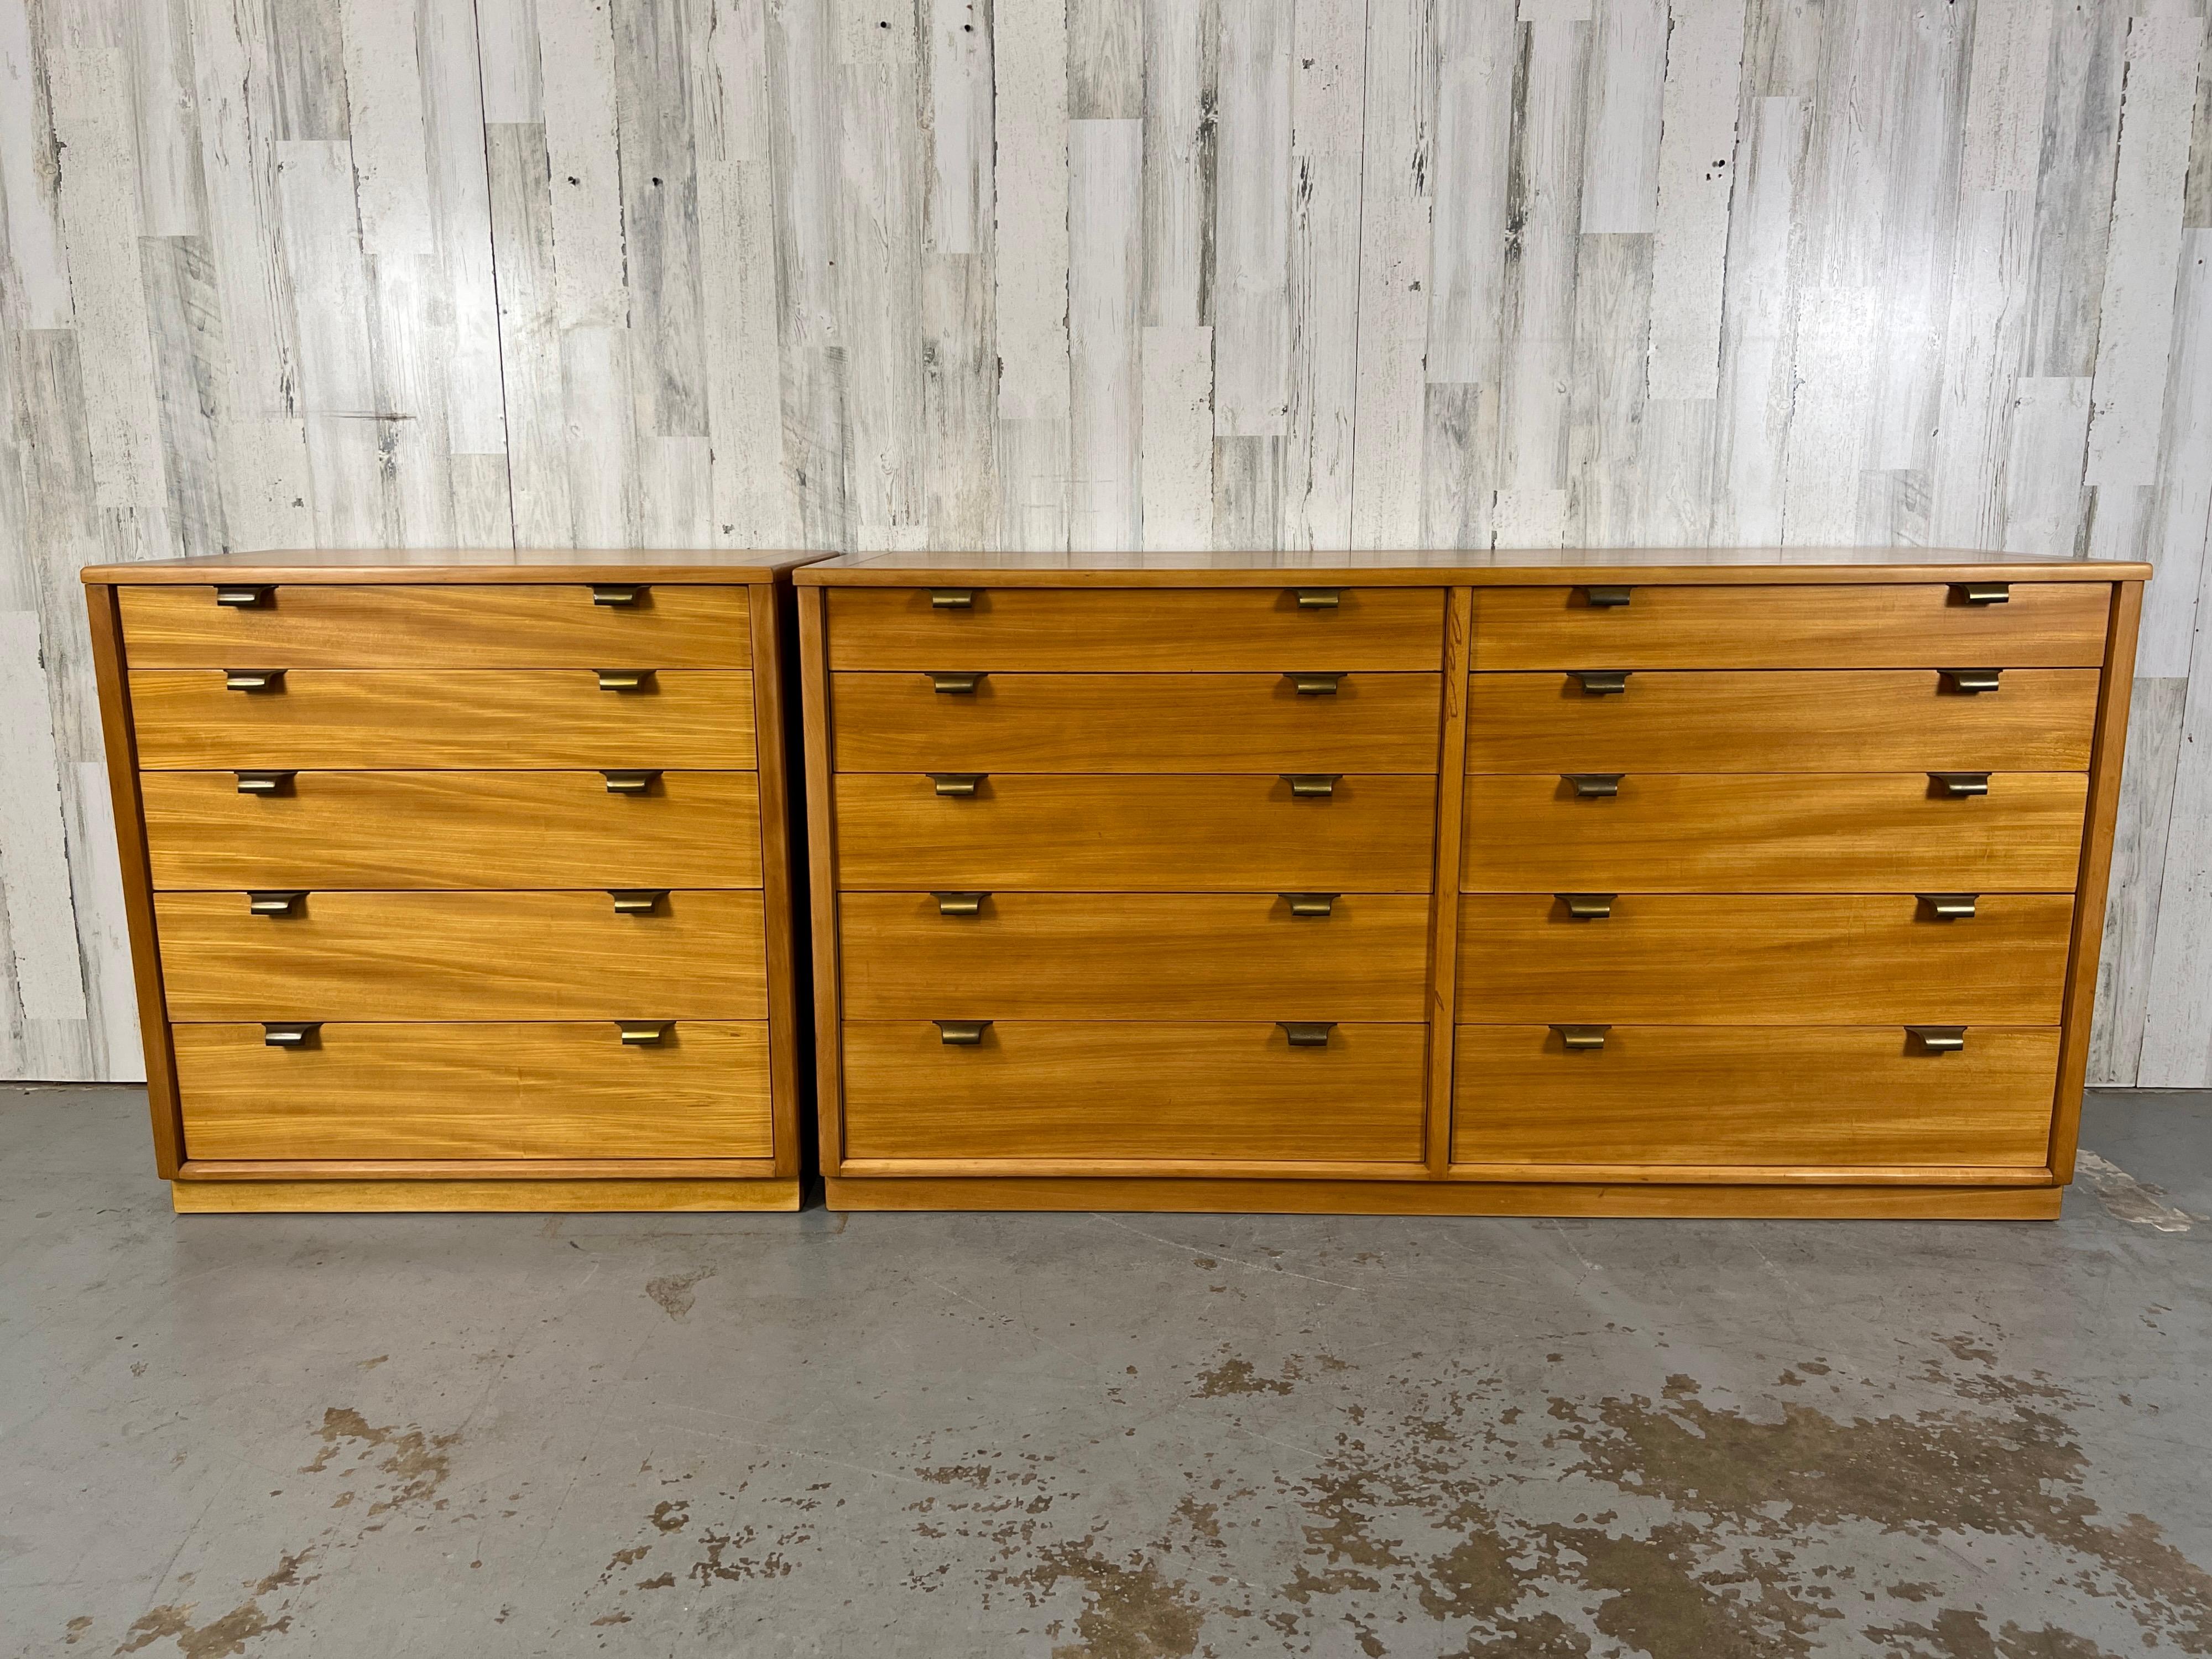 Edward Wormley for Drexel Precedent 10 and 5 Drawer Dresser Set. These dressers are made of stained elm with original solid brass hardware. 
Longer dresser measures: 62 W X 19 D X 31.5 H
Smaller dresser 32 W X 19 D X 31.5 H